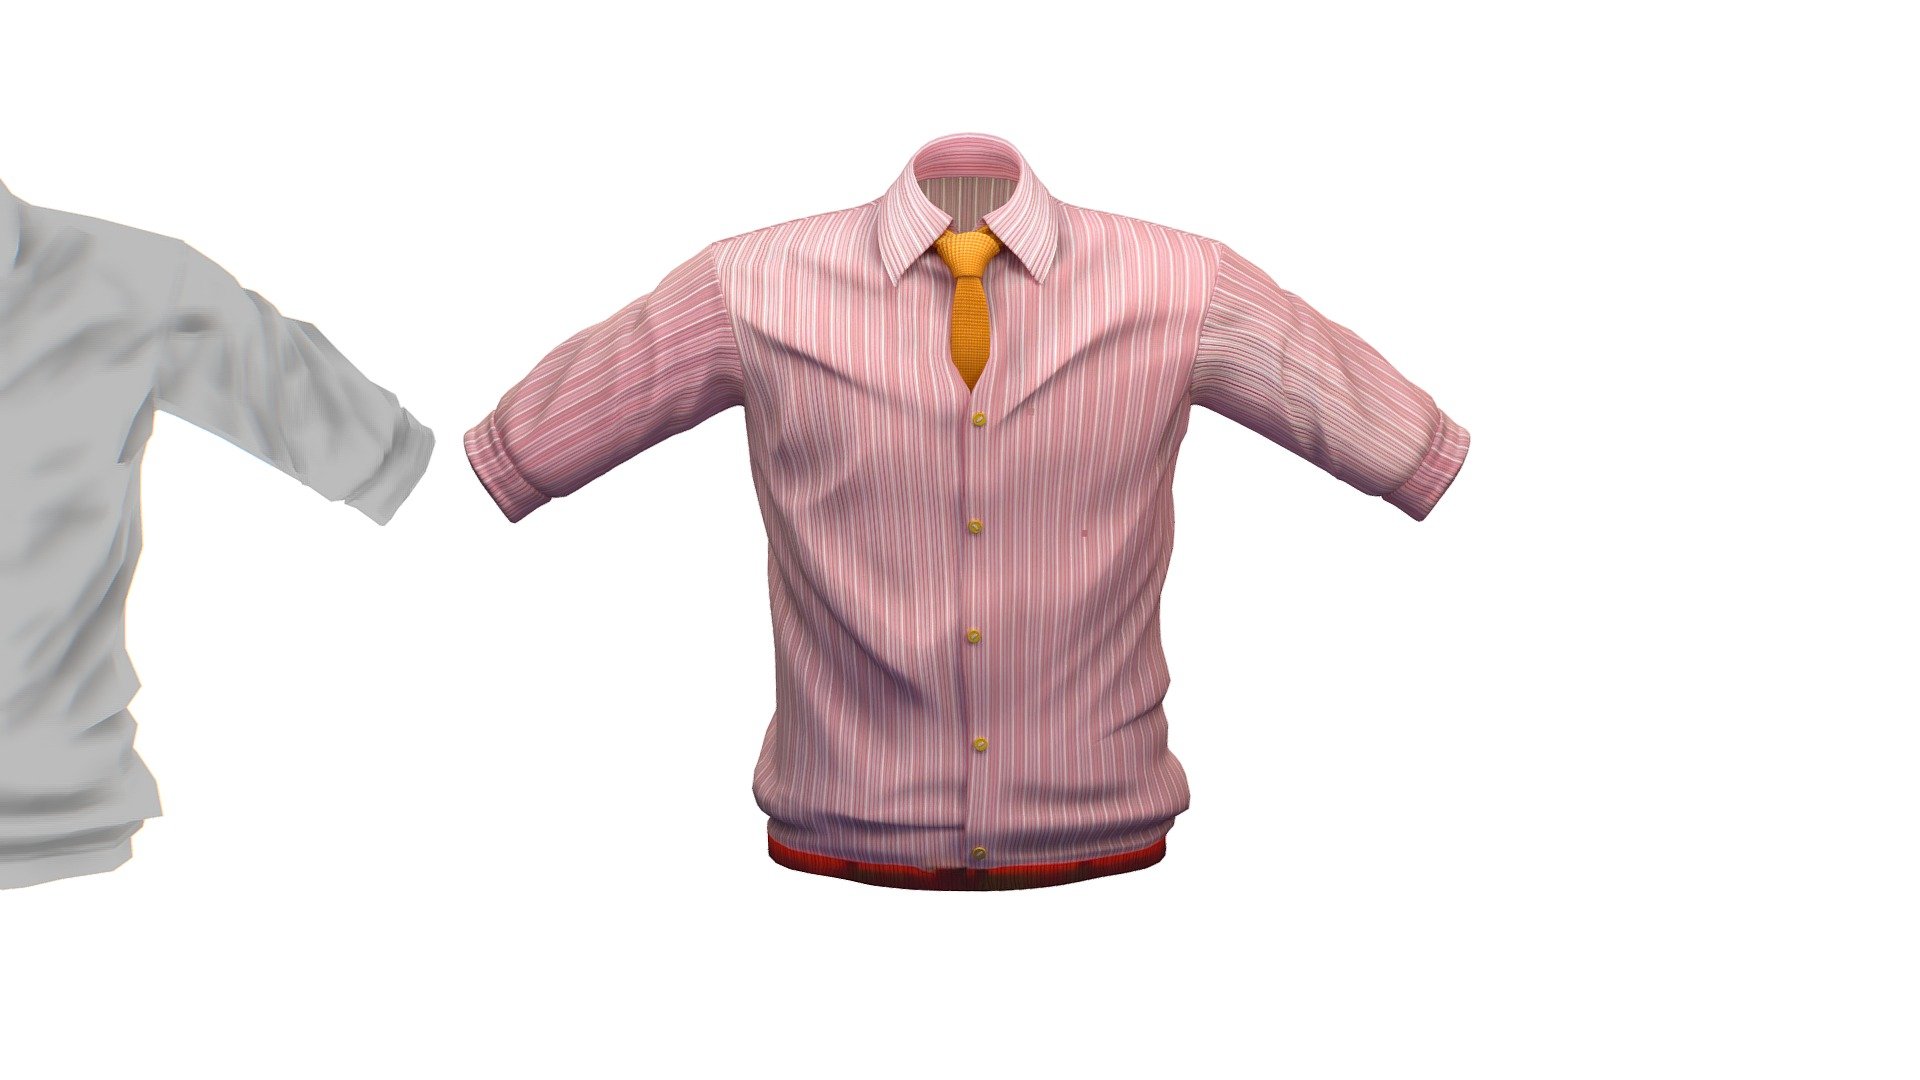 Cartoon High Poly Subdivision Striped Shirt

No HDRI map, No Light, No material settings - only Diffuse/Color Map Texture (2800Х2800)

More information about the 3D model: please use the Sketchfab Model Inspector - Key (i) - Cartoon High Poly Subdivision Striped Shirt - Buy Royalty Free 3D model by Oleg Shuldiakov (@olegshuldiakov) 3d model